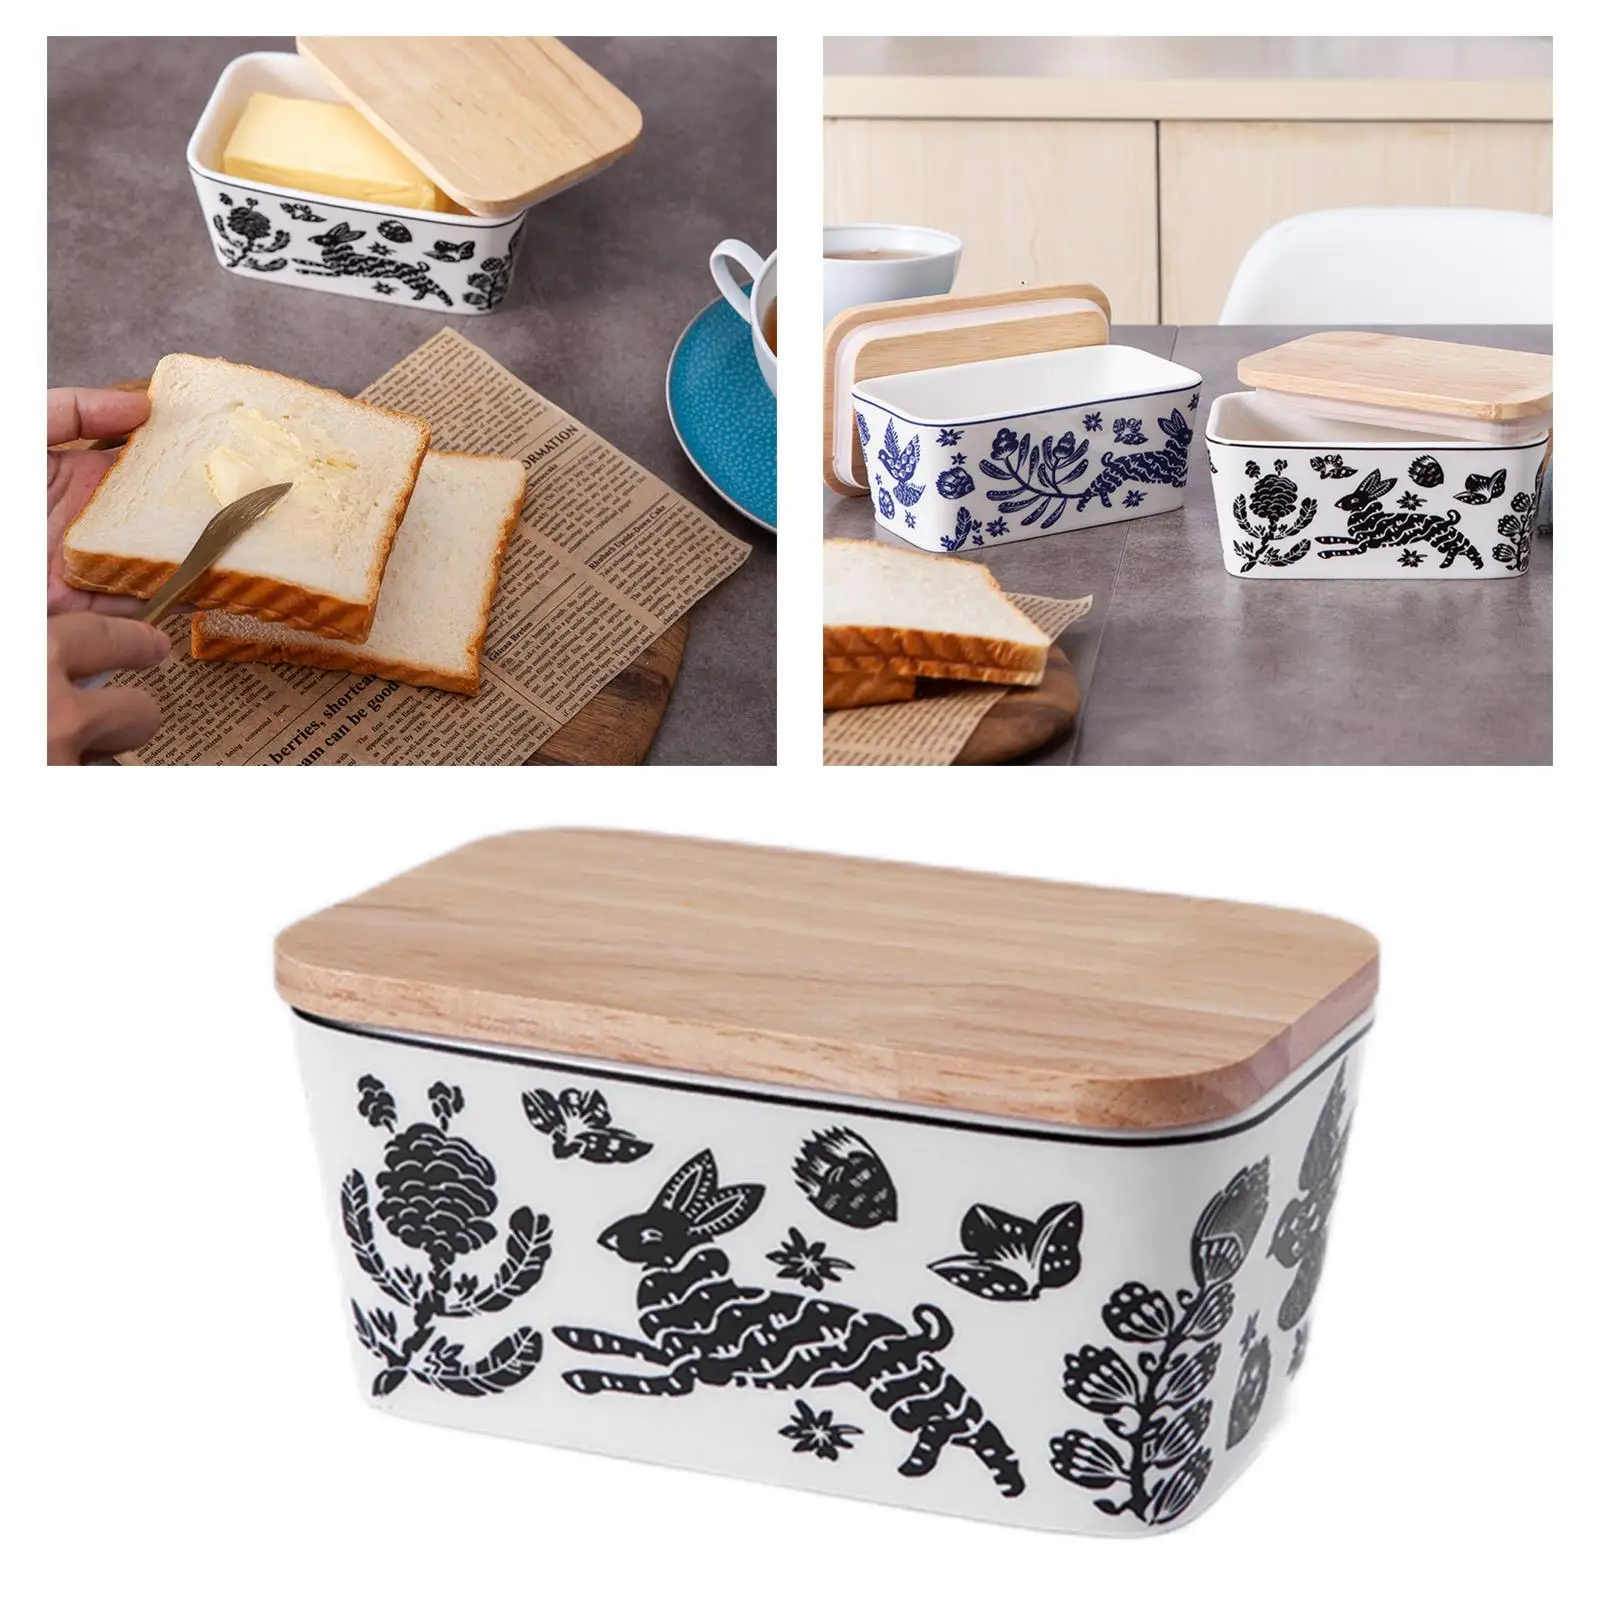 Multifunctional Butter Dish Dishwasher Safe Crisper Easy Clean Sealing Dish Tray for Refrigerator Dining Room Seasonings Butter